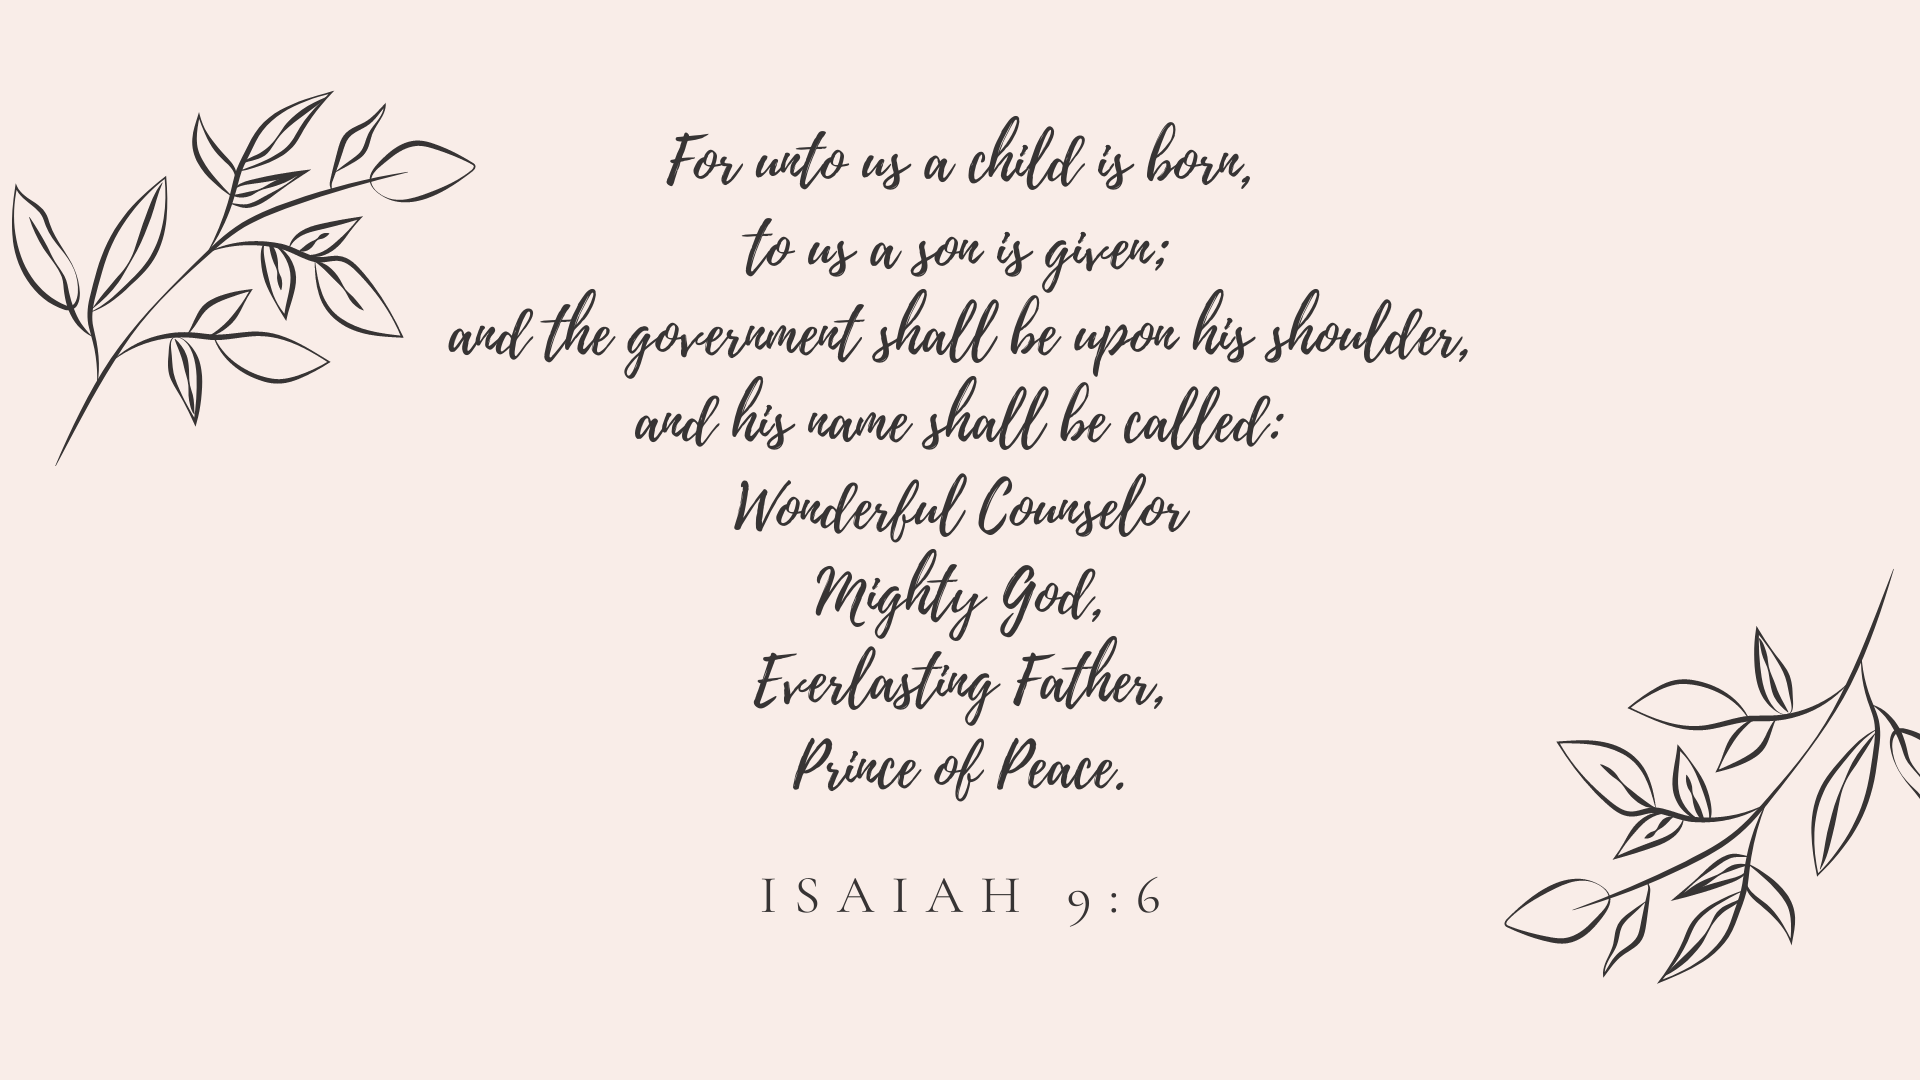 Beige slide with olive branches in the corner and the verse Isaiah 9:6 written in cursive on the front.